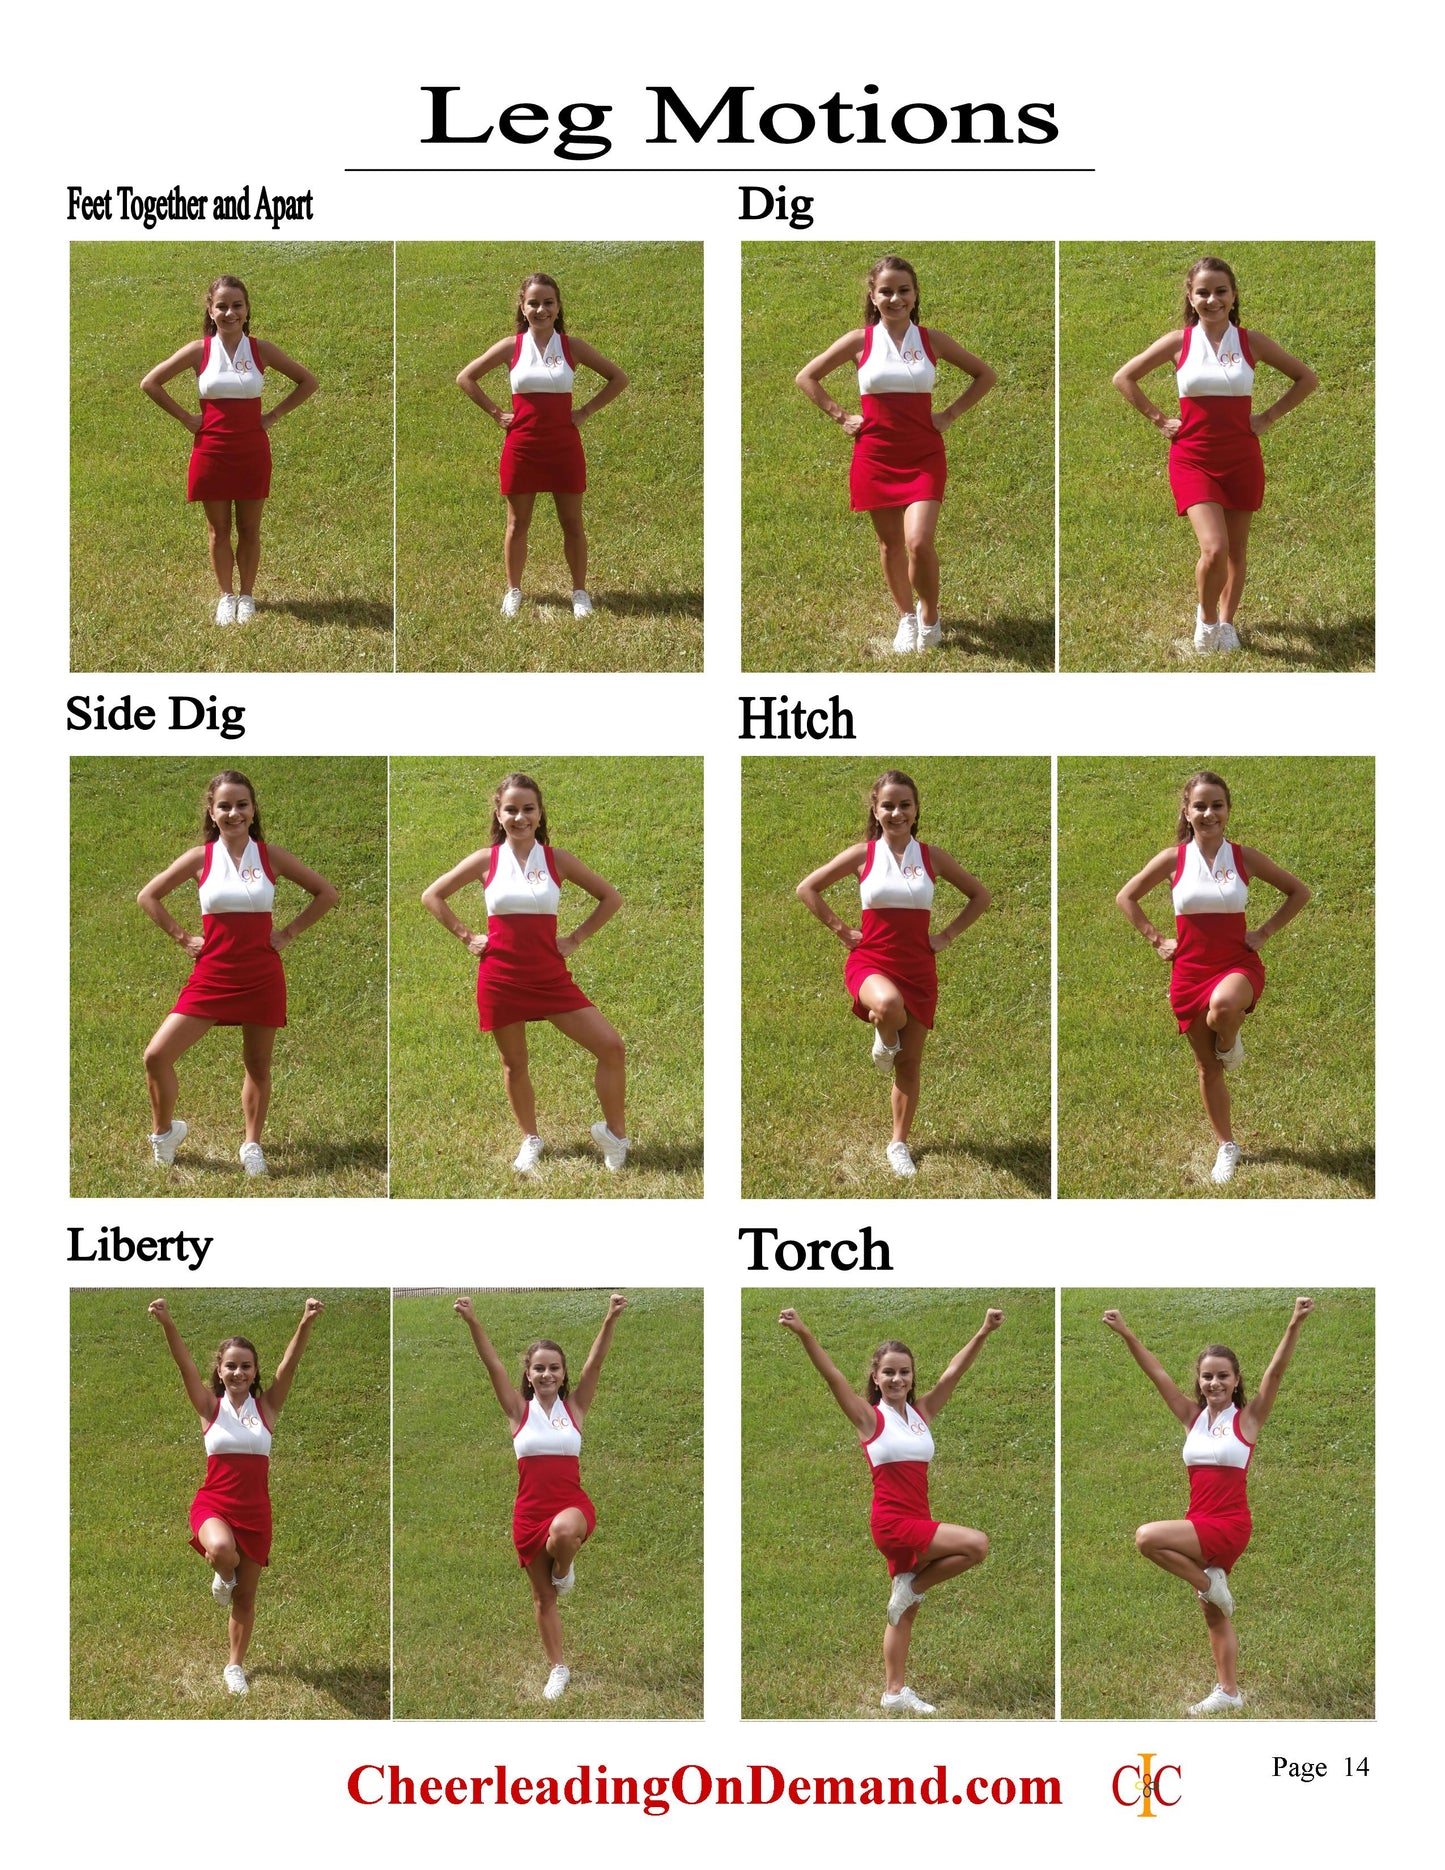 Load image into Gallery viewer, Cheerleading Motions Ebook Program - Cheer and Dance On Demand
